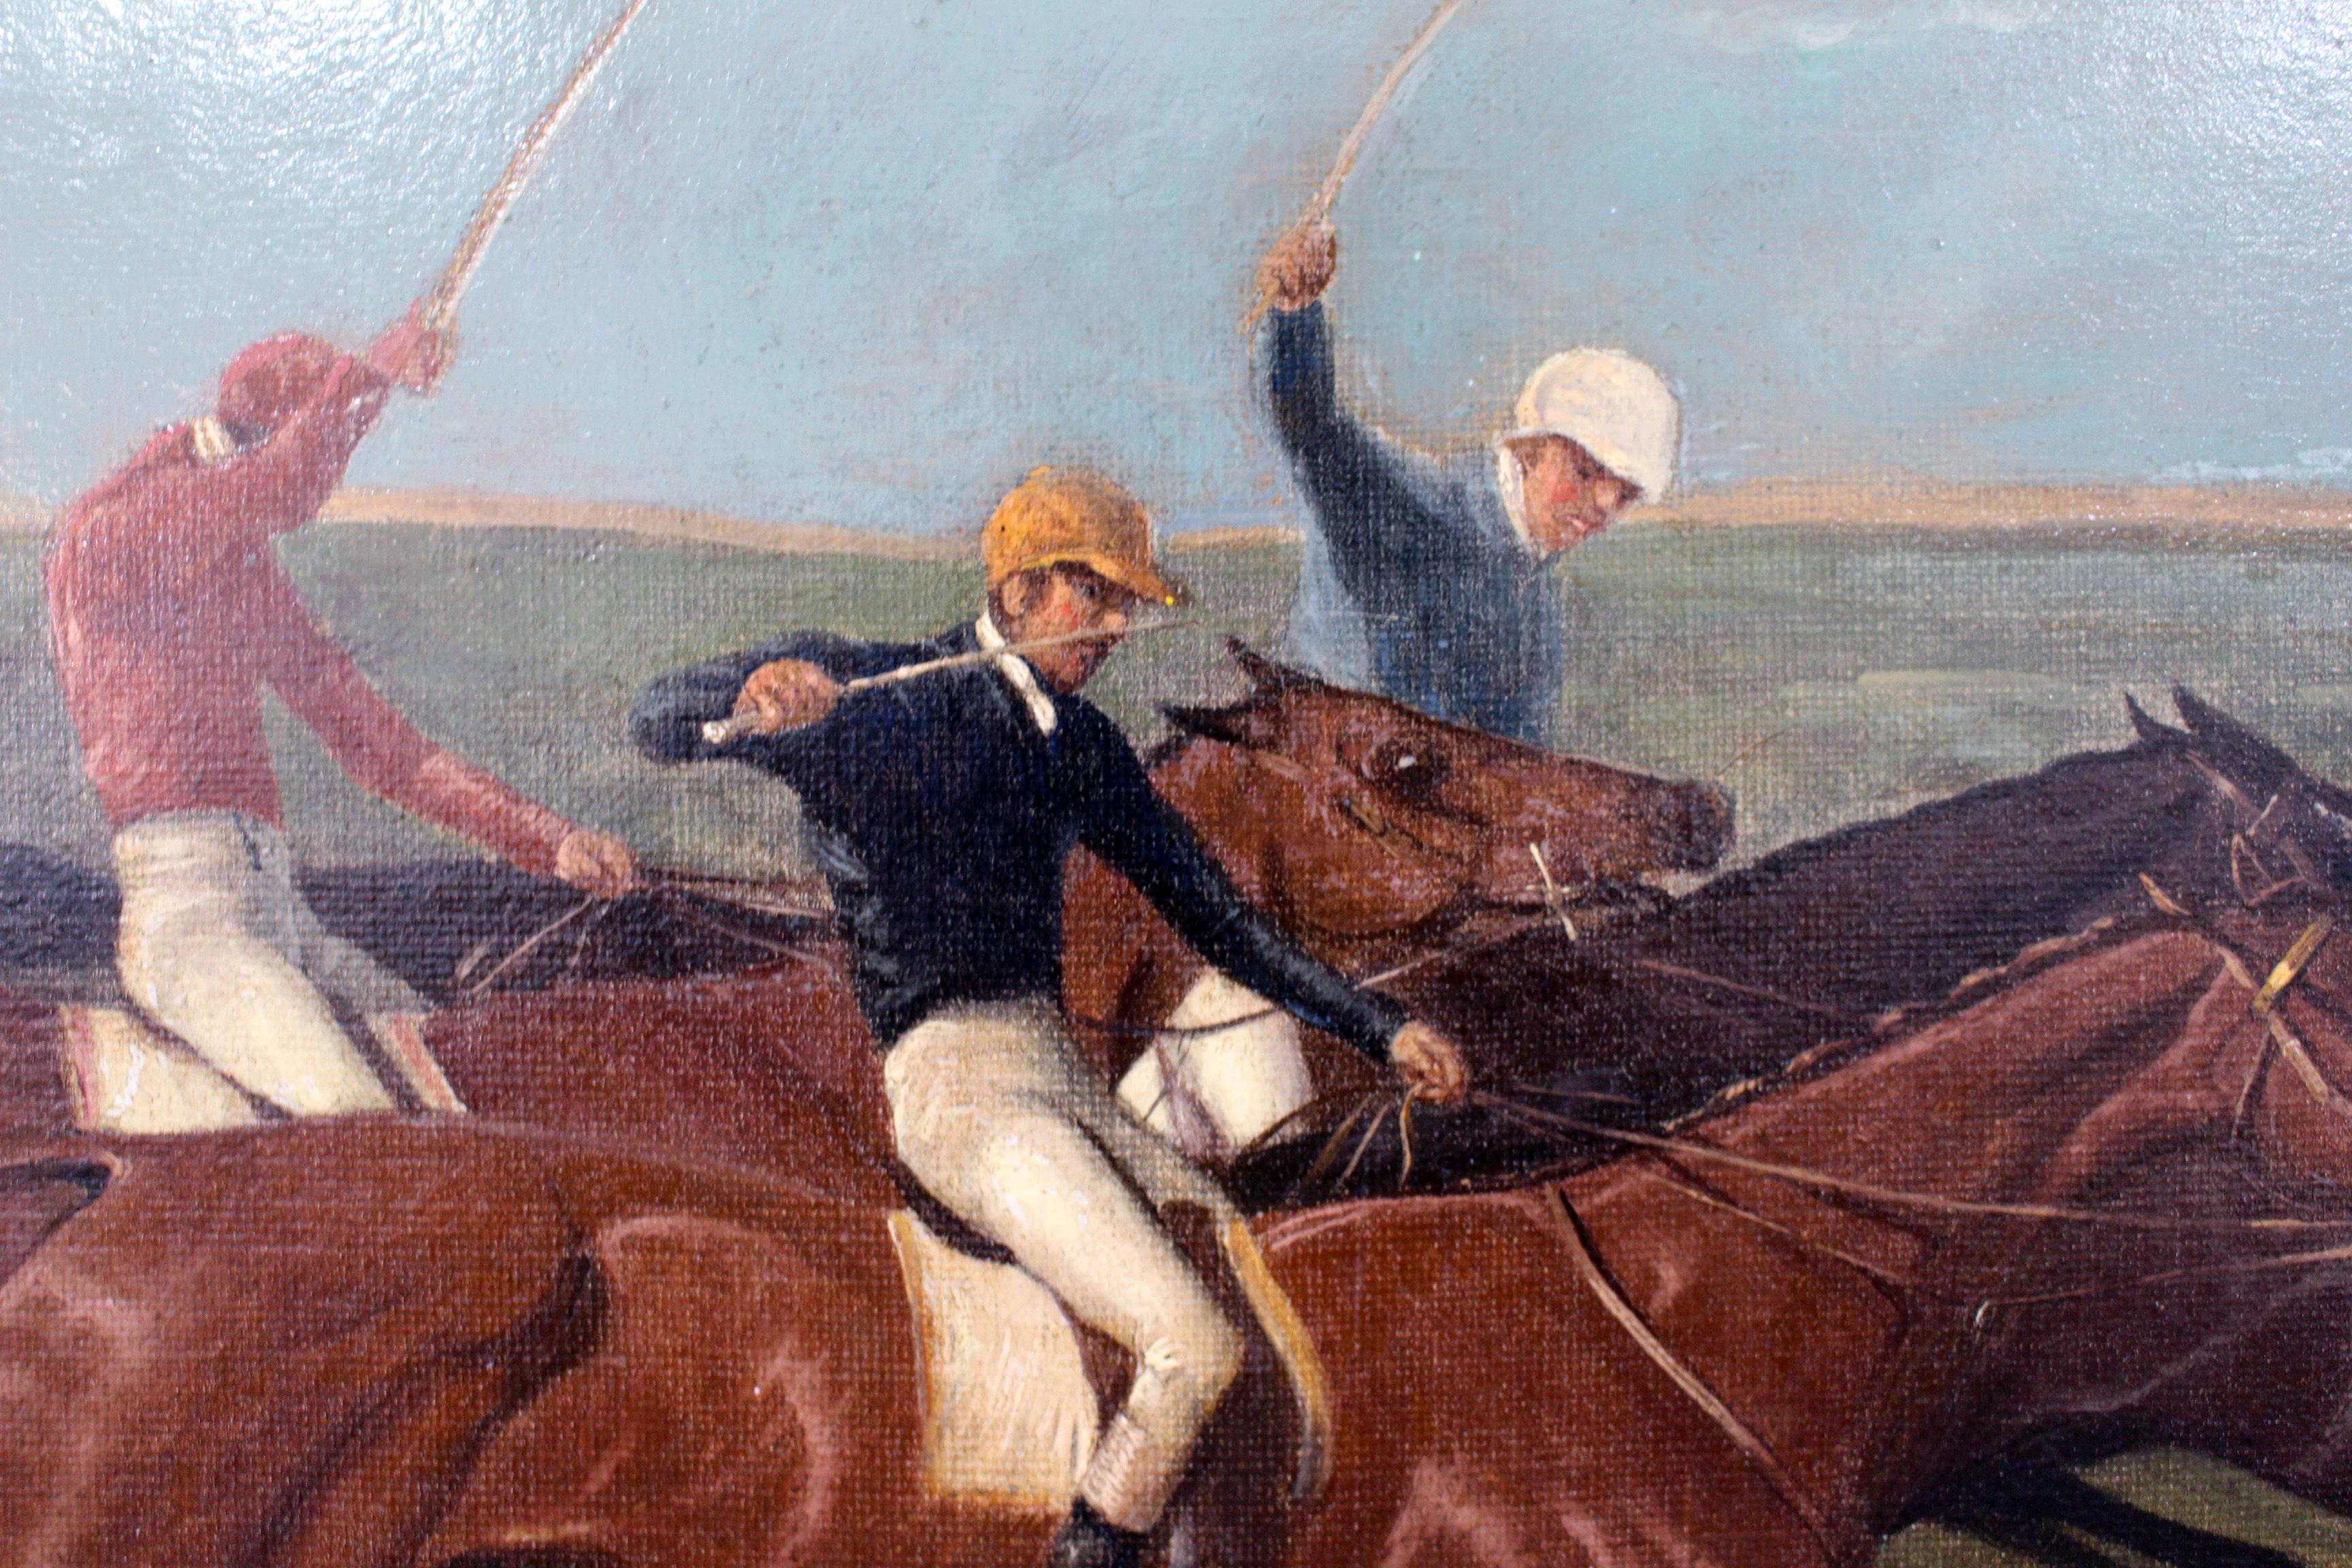 Excellent example of 19th century sporting painting with amazing color and detail.